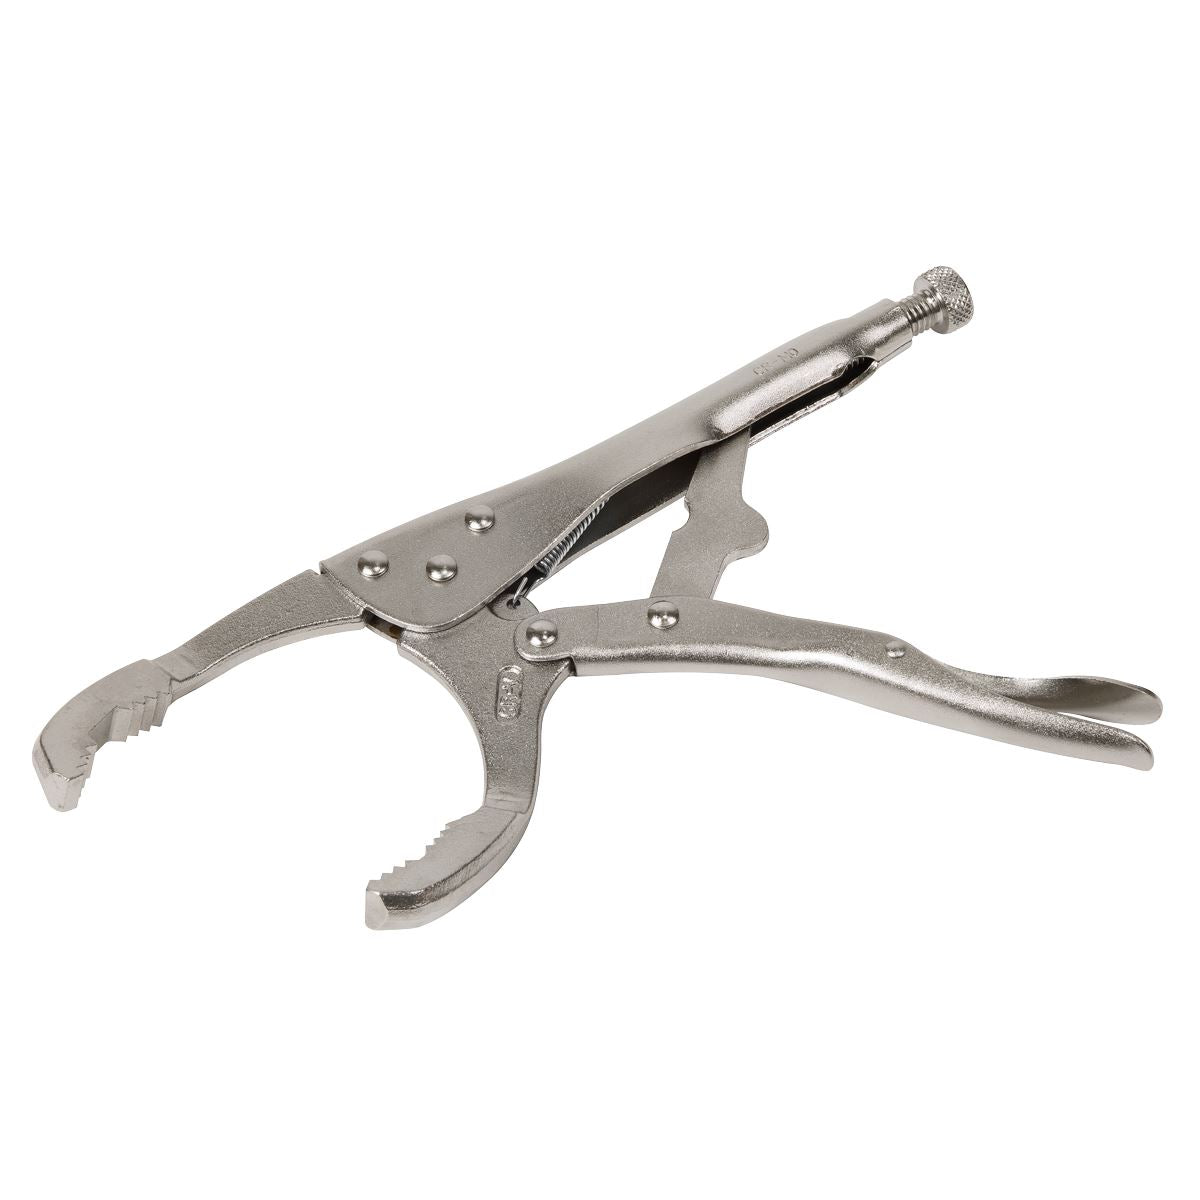 Sealey Ø45-130mm Oil Filter Locking Pliers - Angled